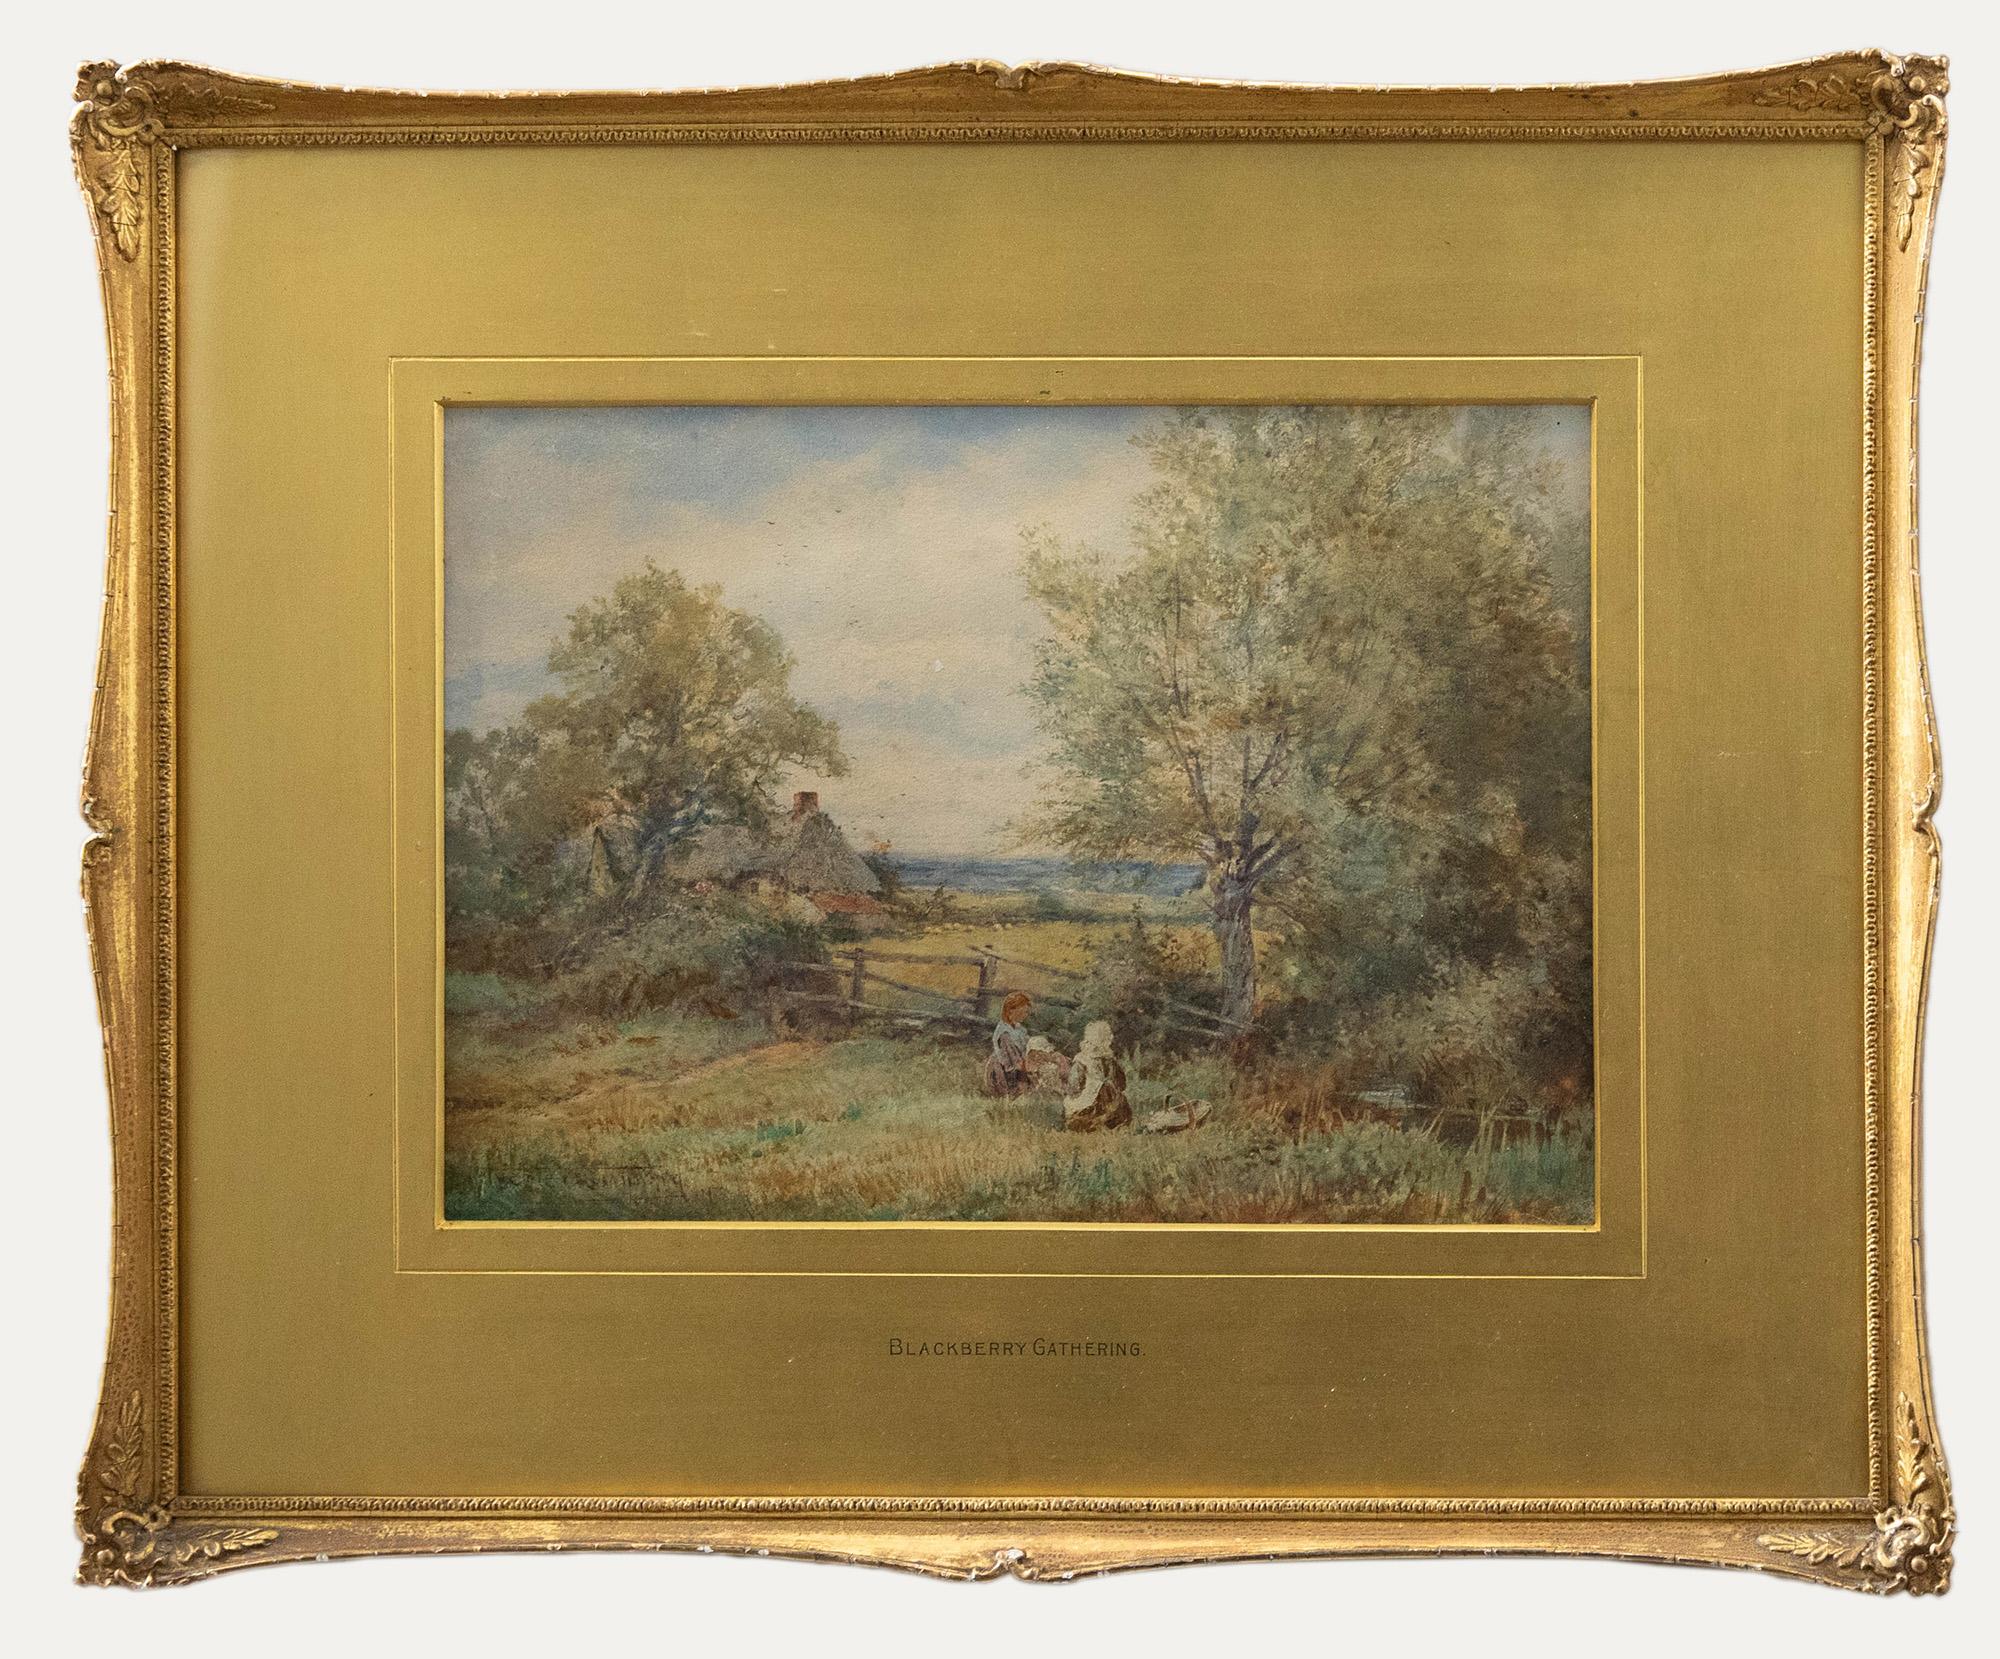 Signed to the lower left. Presented in a swept gilt frame and gold card mount. Title inscribed to the mount. On paper.